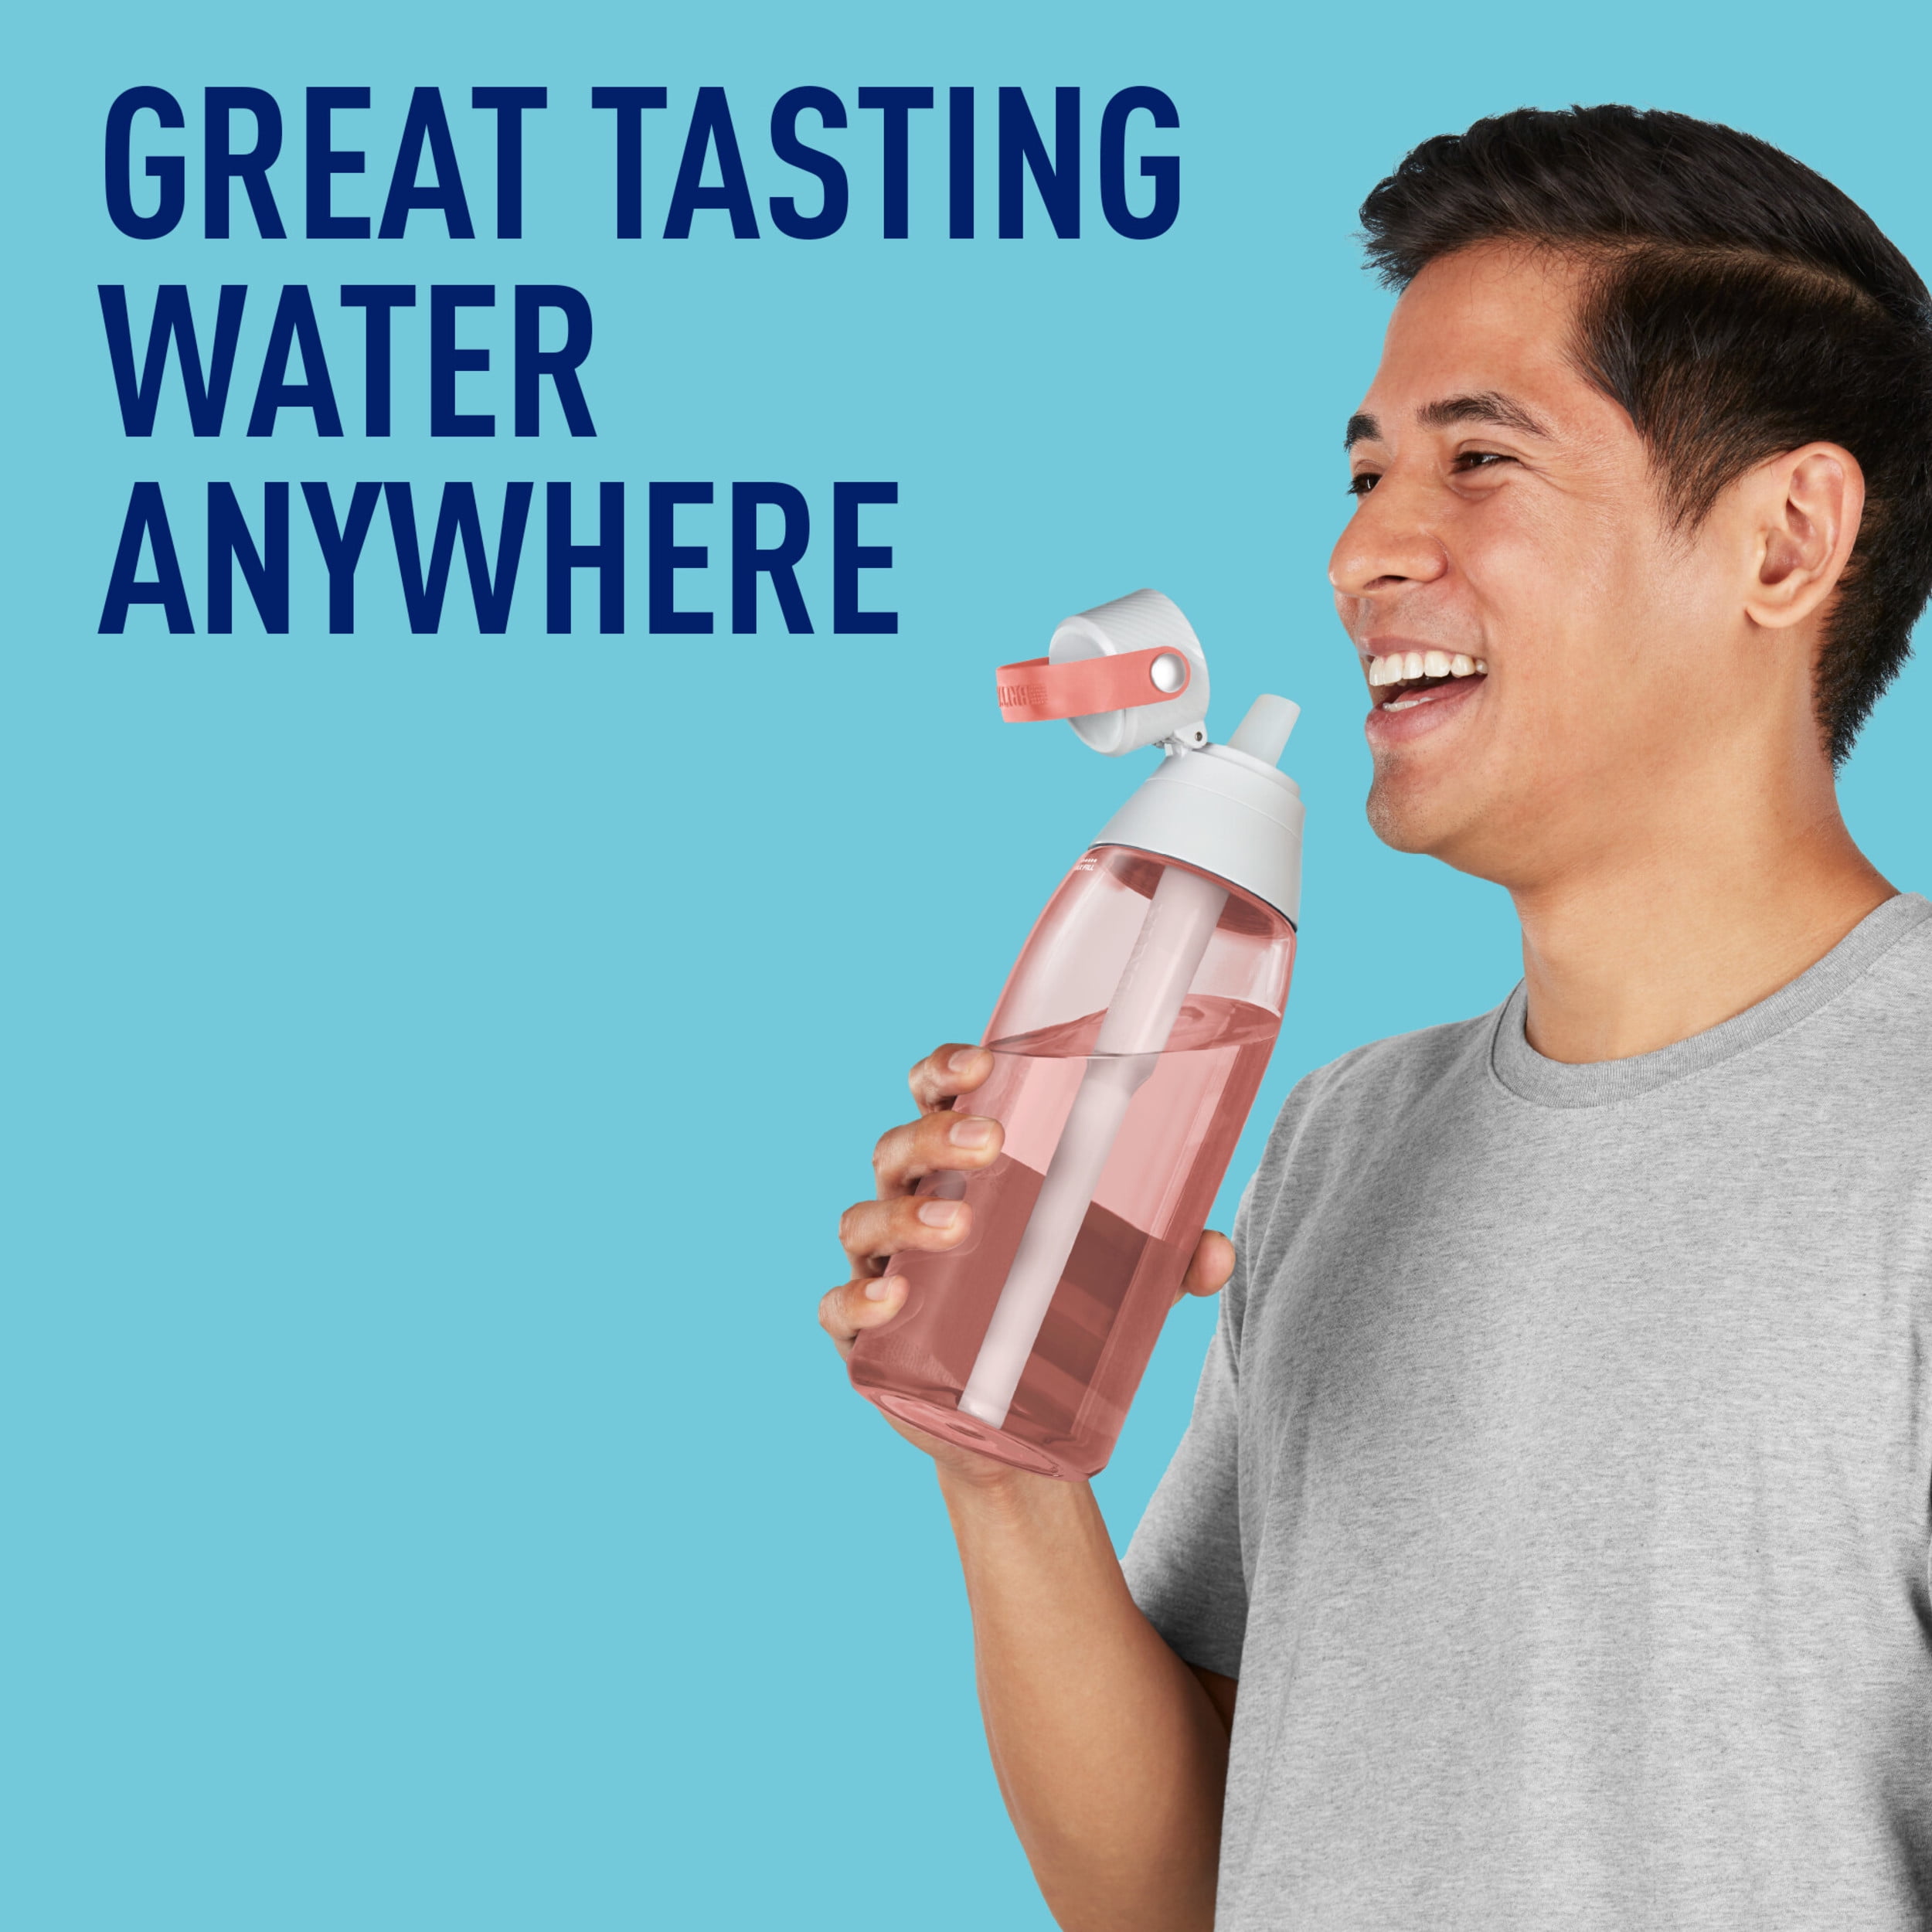 Brita Filtered Water Bottles: $13.99 for Two-Pack